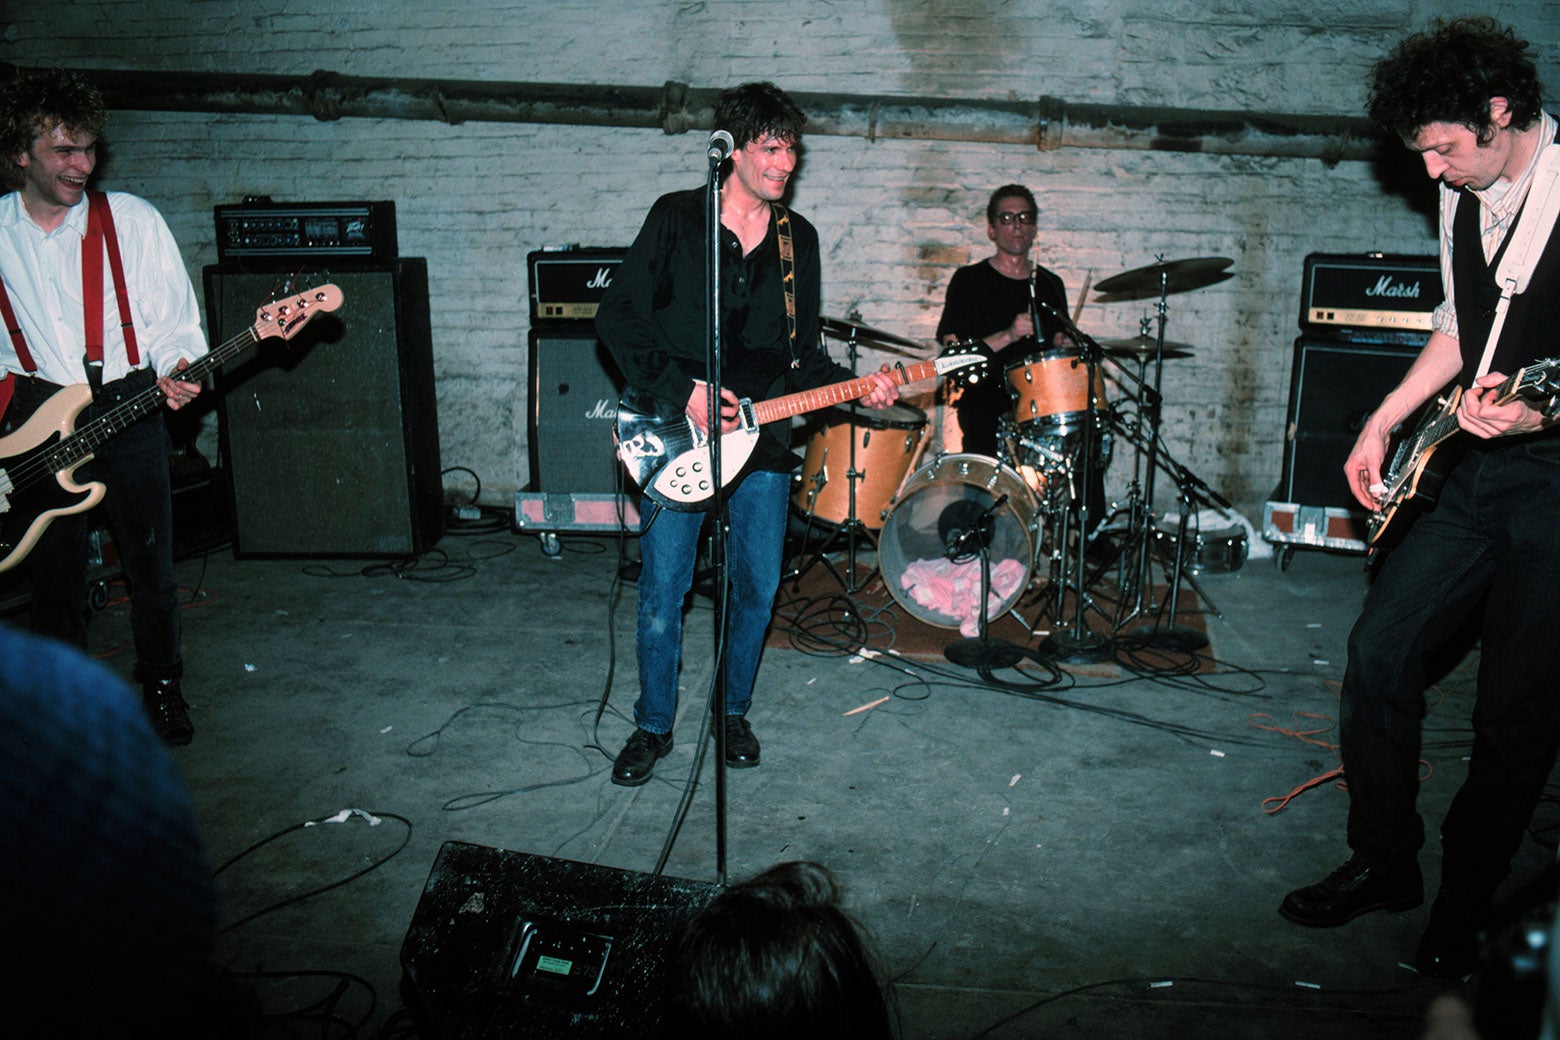 The band members smile while playing on a basement stage against a white brick wall. 